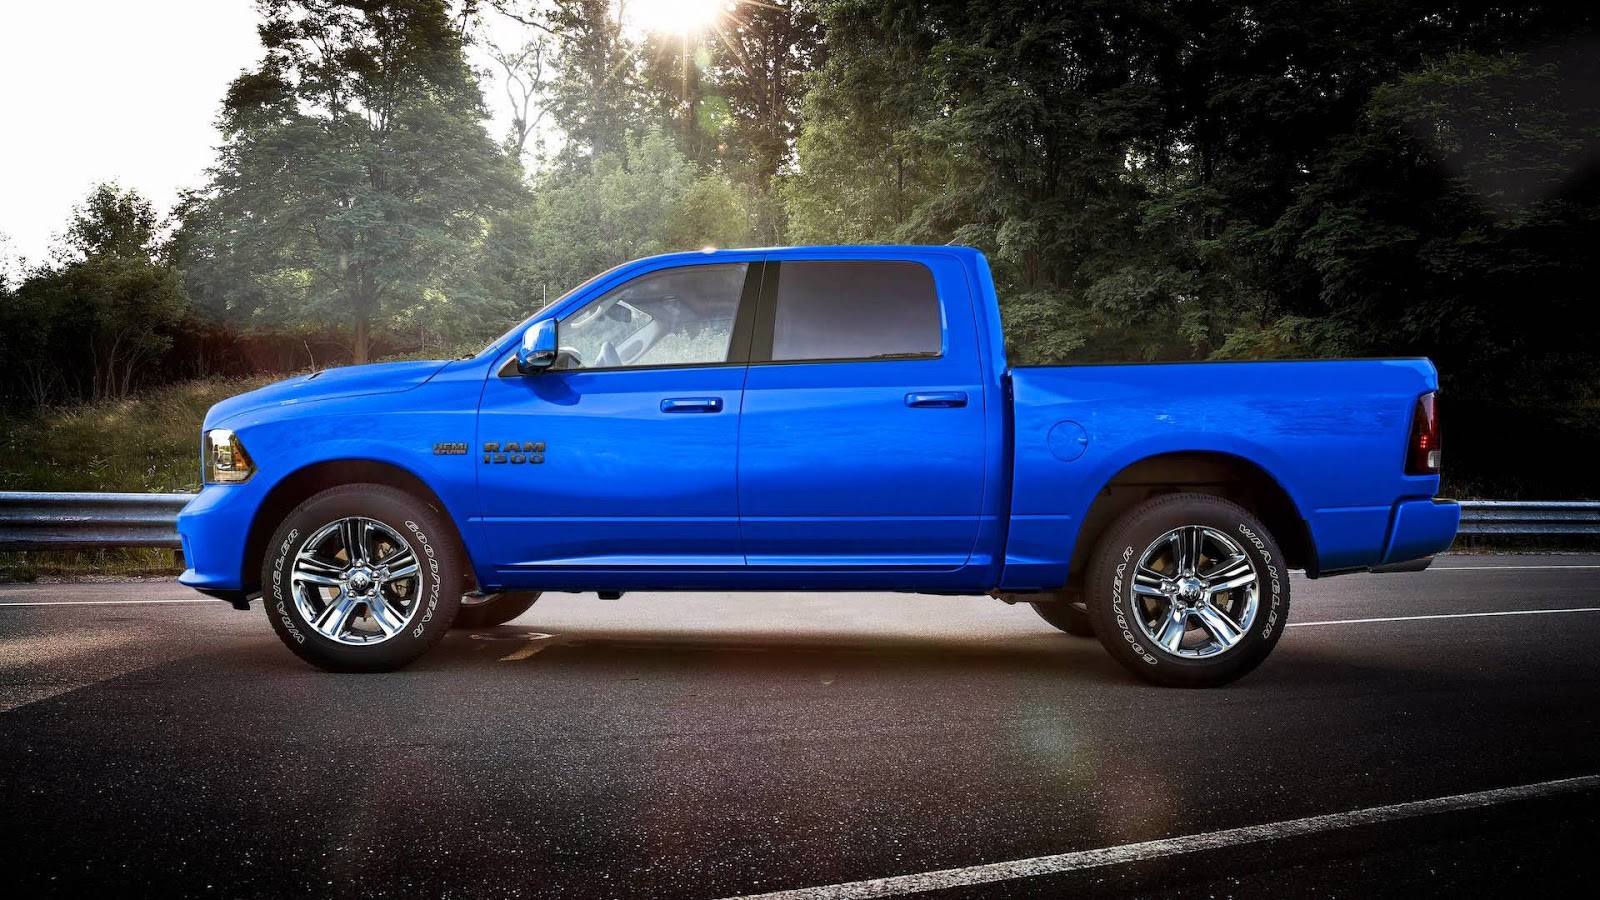 2018 Ram 1500 Hydro Blue Sport Edition Gets A Racy French Kiss | Carscoops